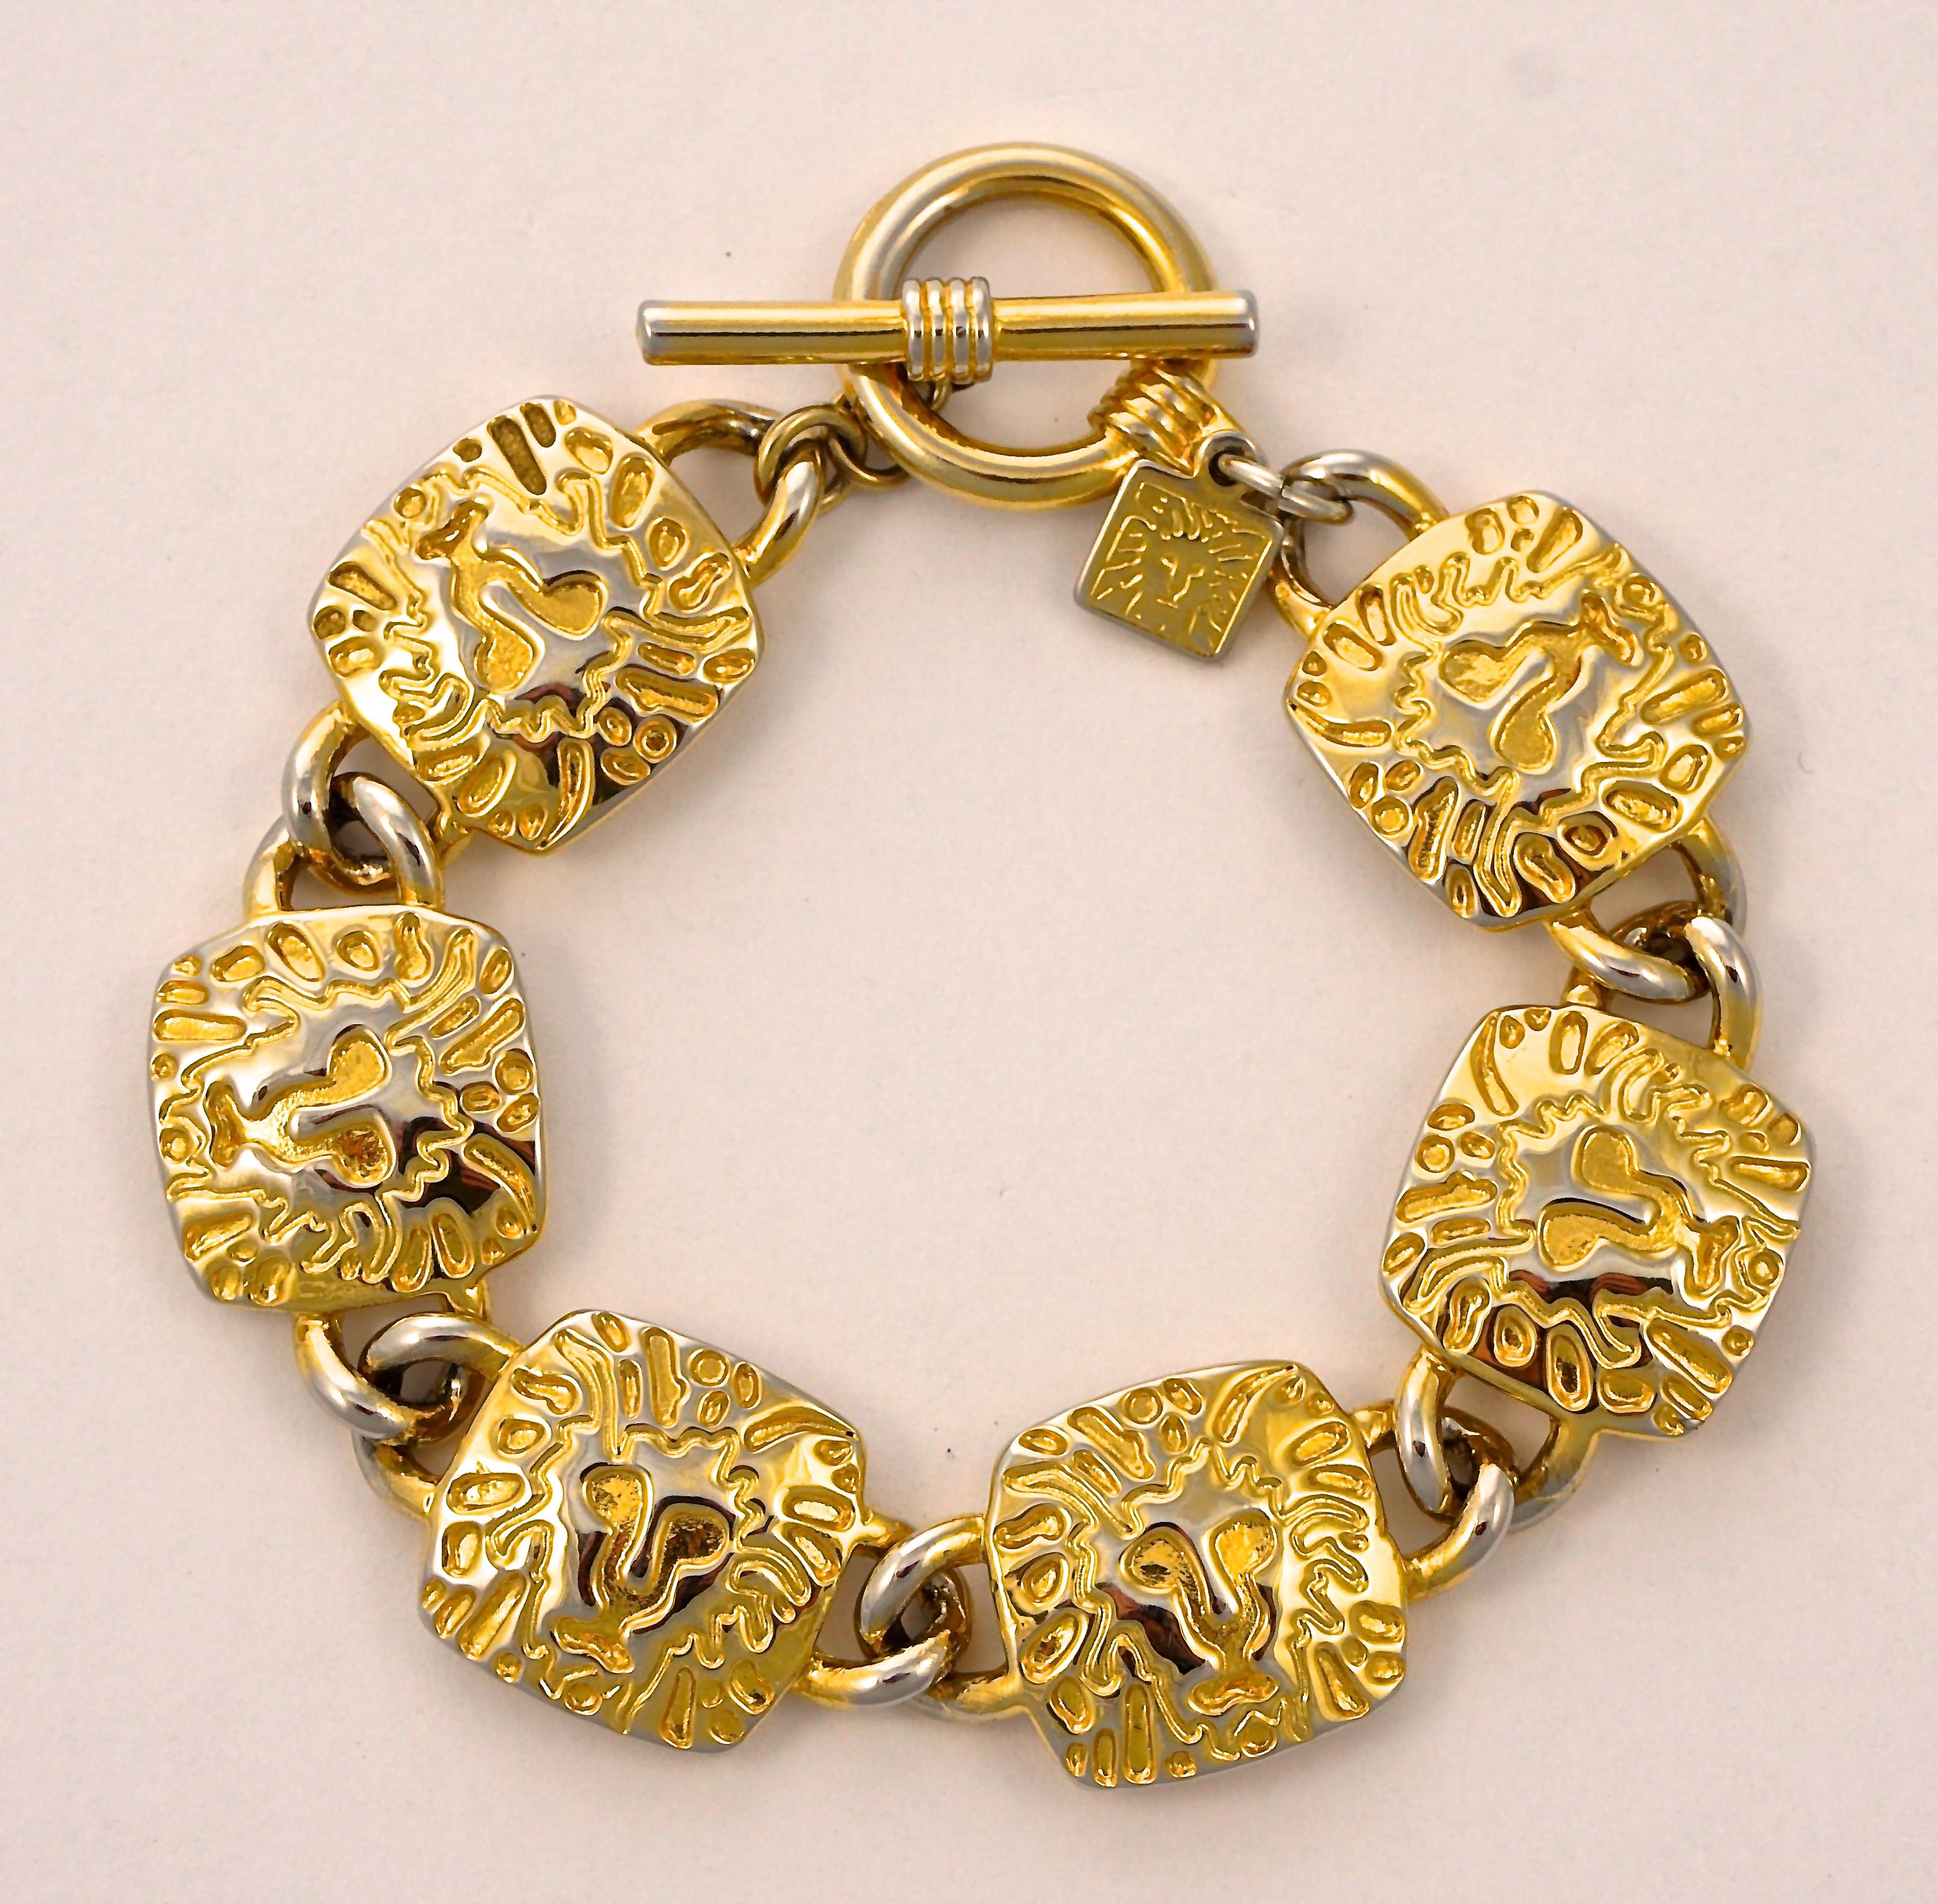 Anne Klein gold plated lion link bracelet and lion drop earrings. The bracelet is length 19.5cm / 7.67 inches by width 1.7cm / .67 inch, it has a toggle clasp and the Anne Klein lion logo tag. The earrings are length 4.75cm / 1.87 inches by maximum